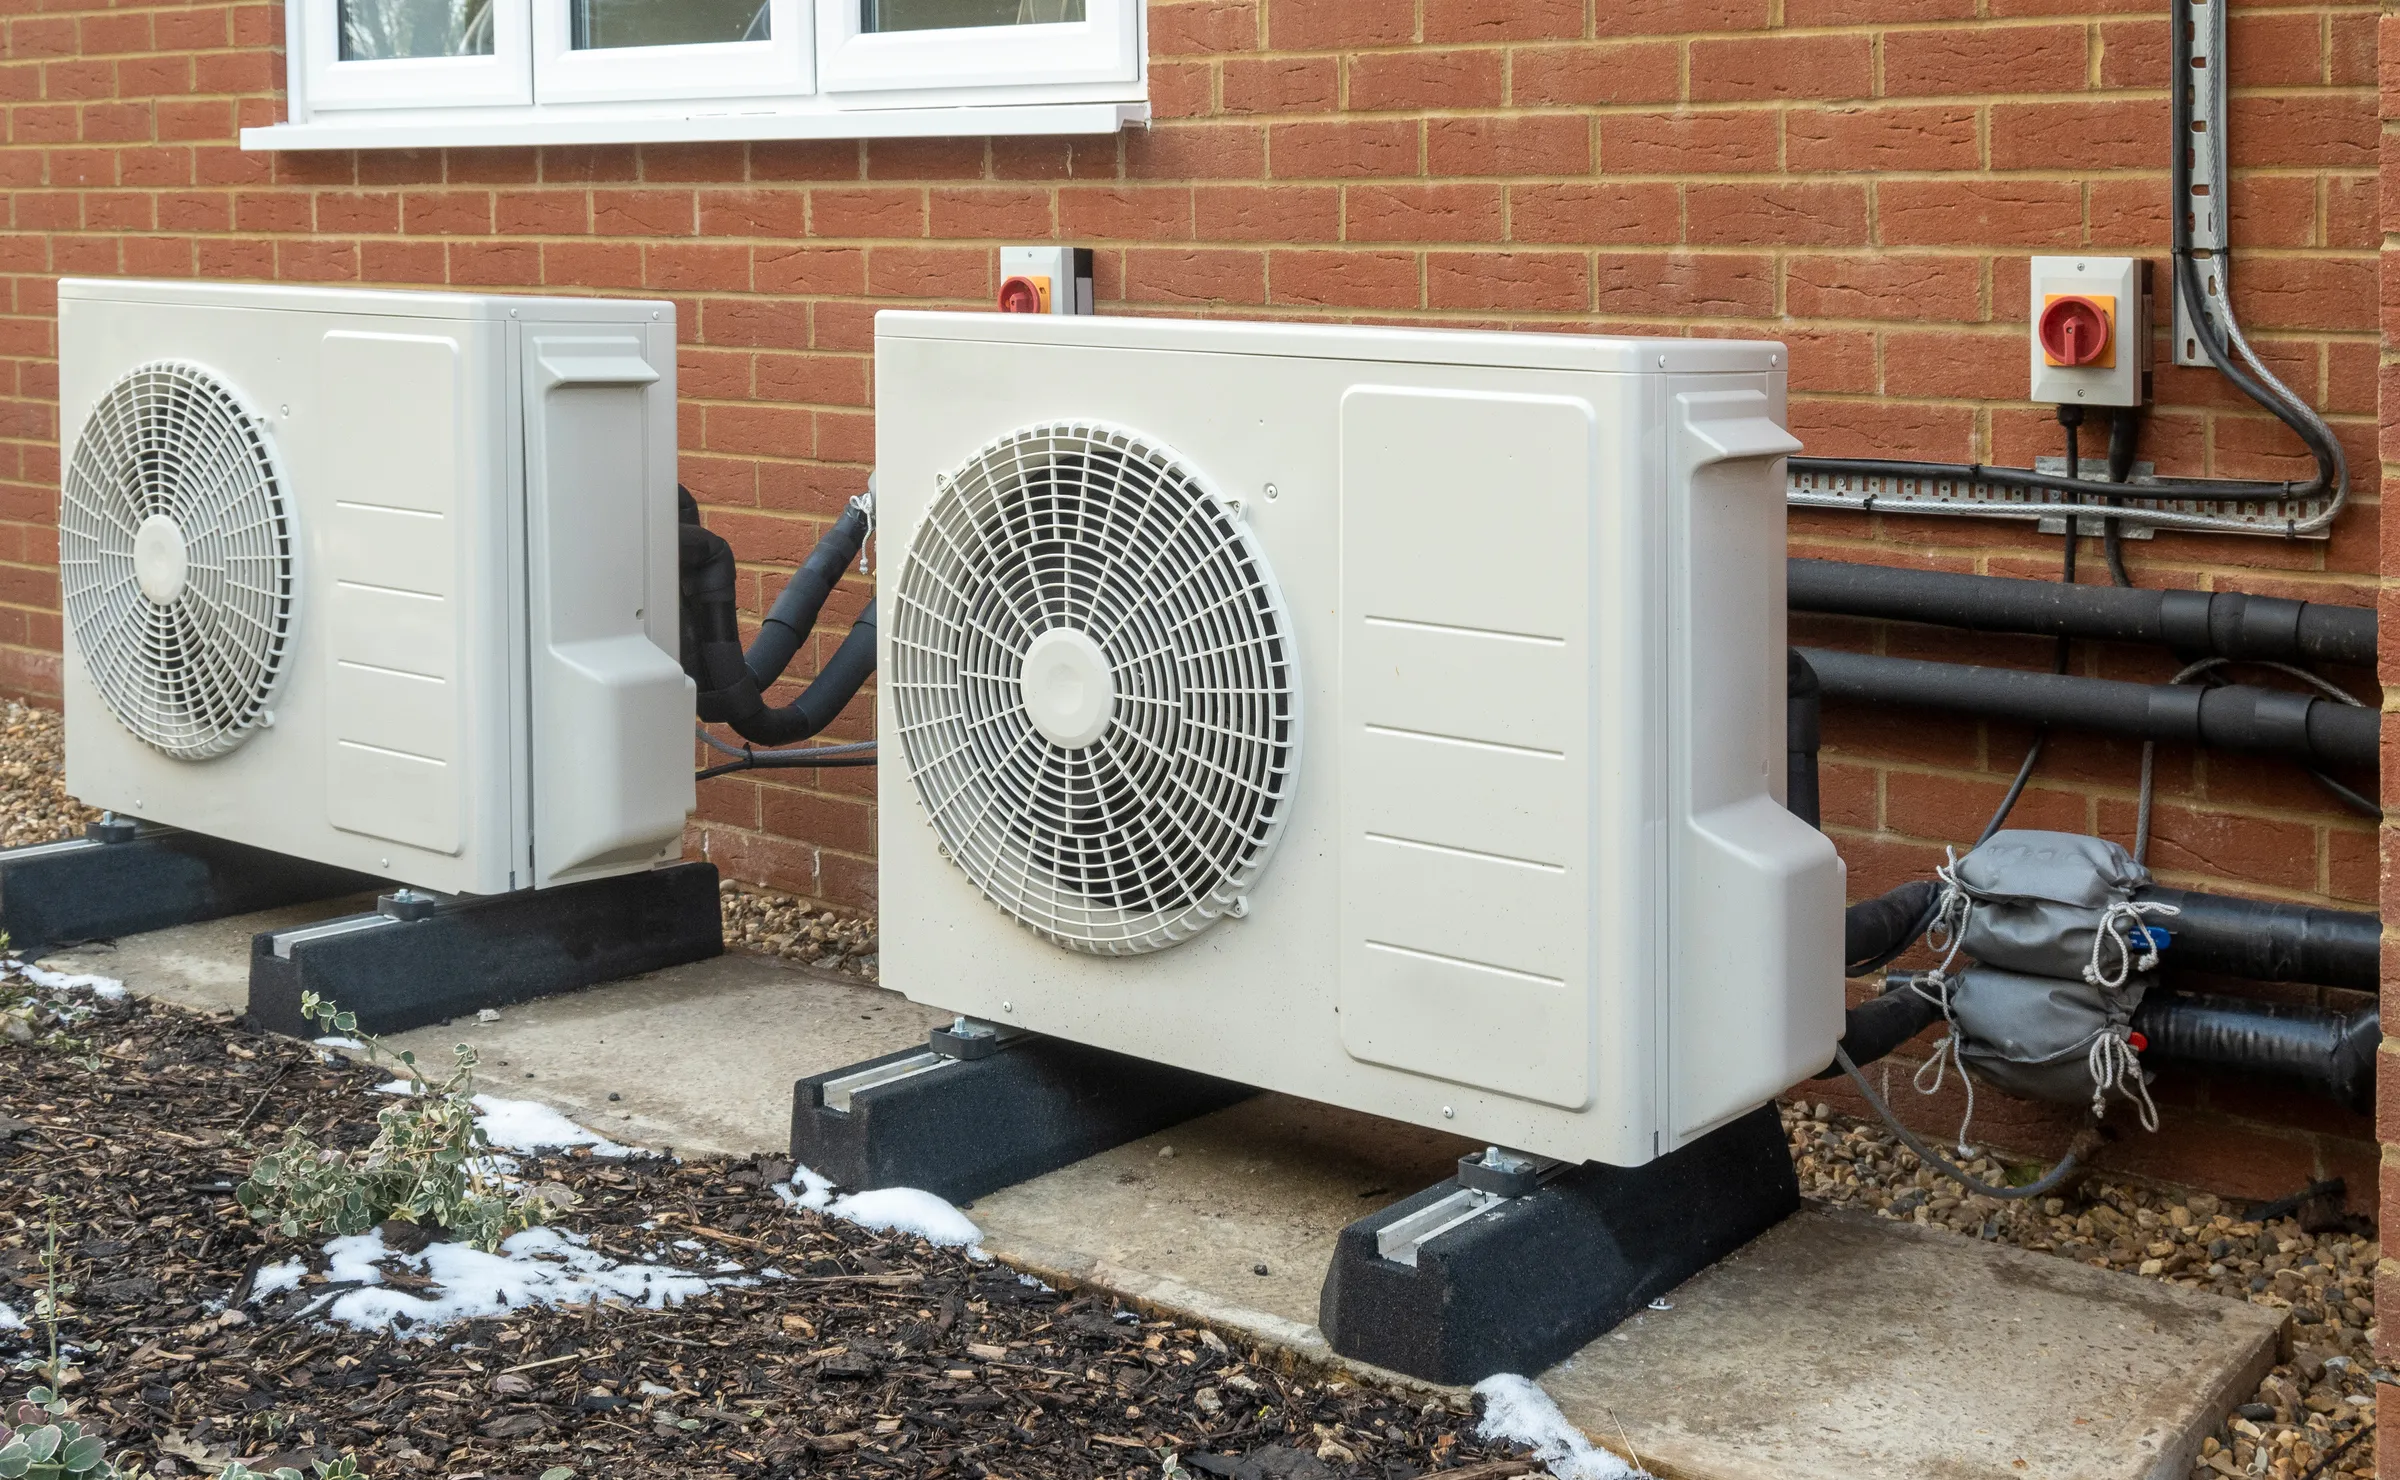 2 heat pumps outside of a residence